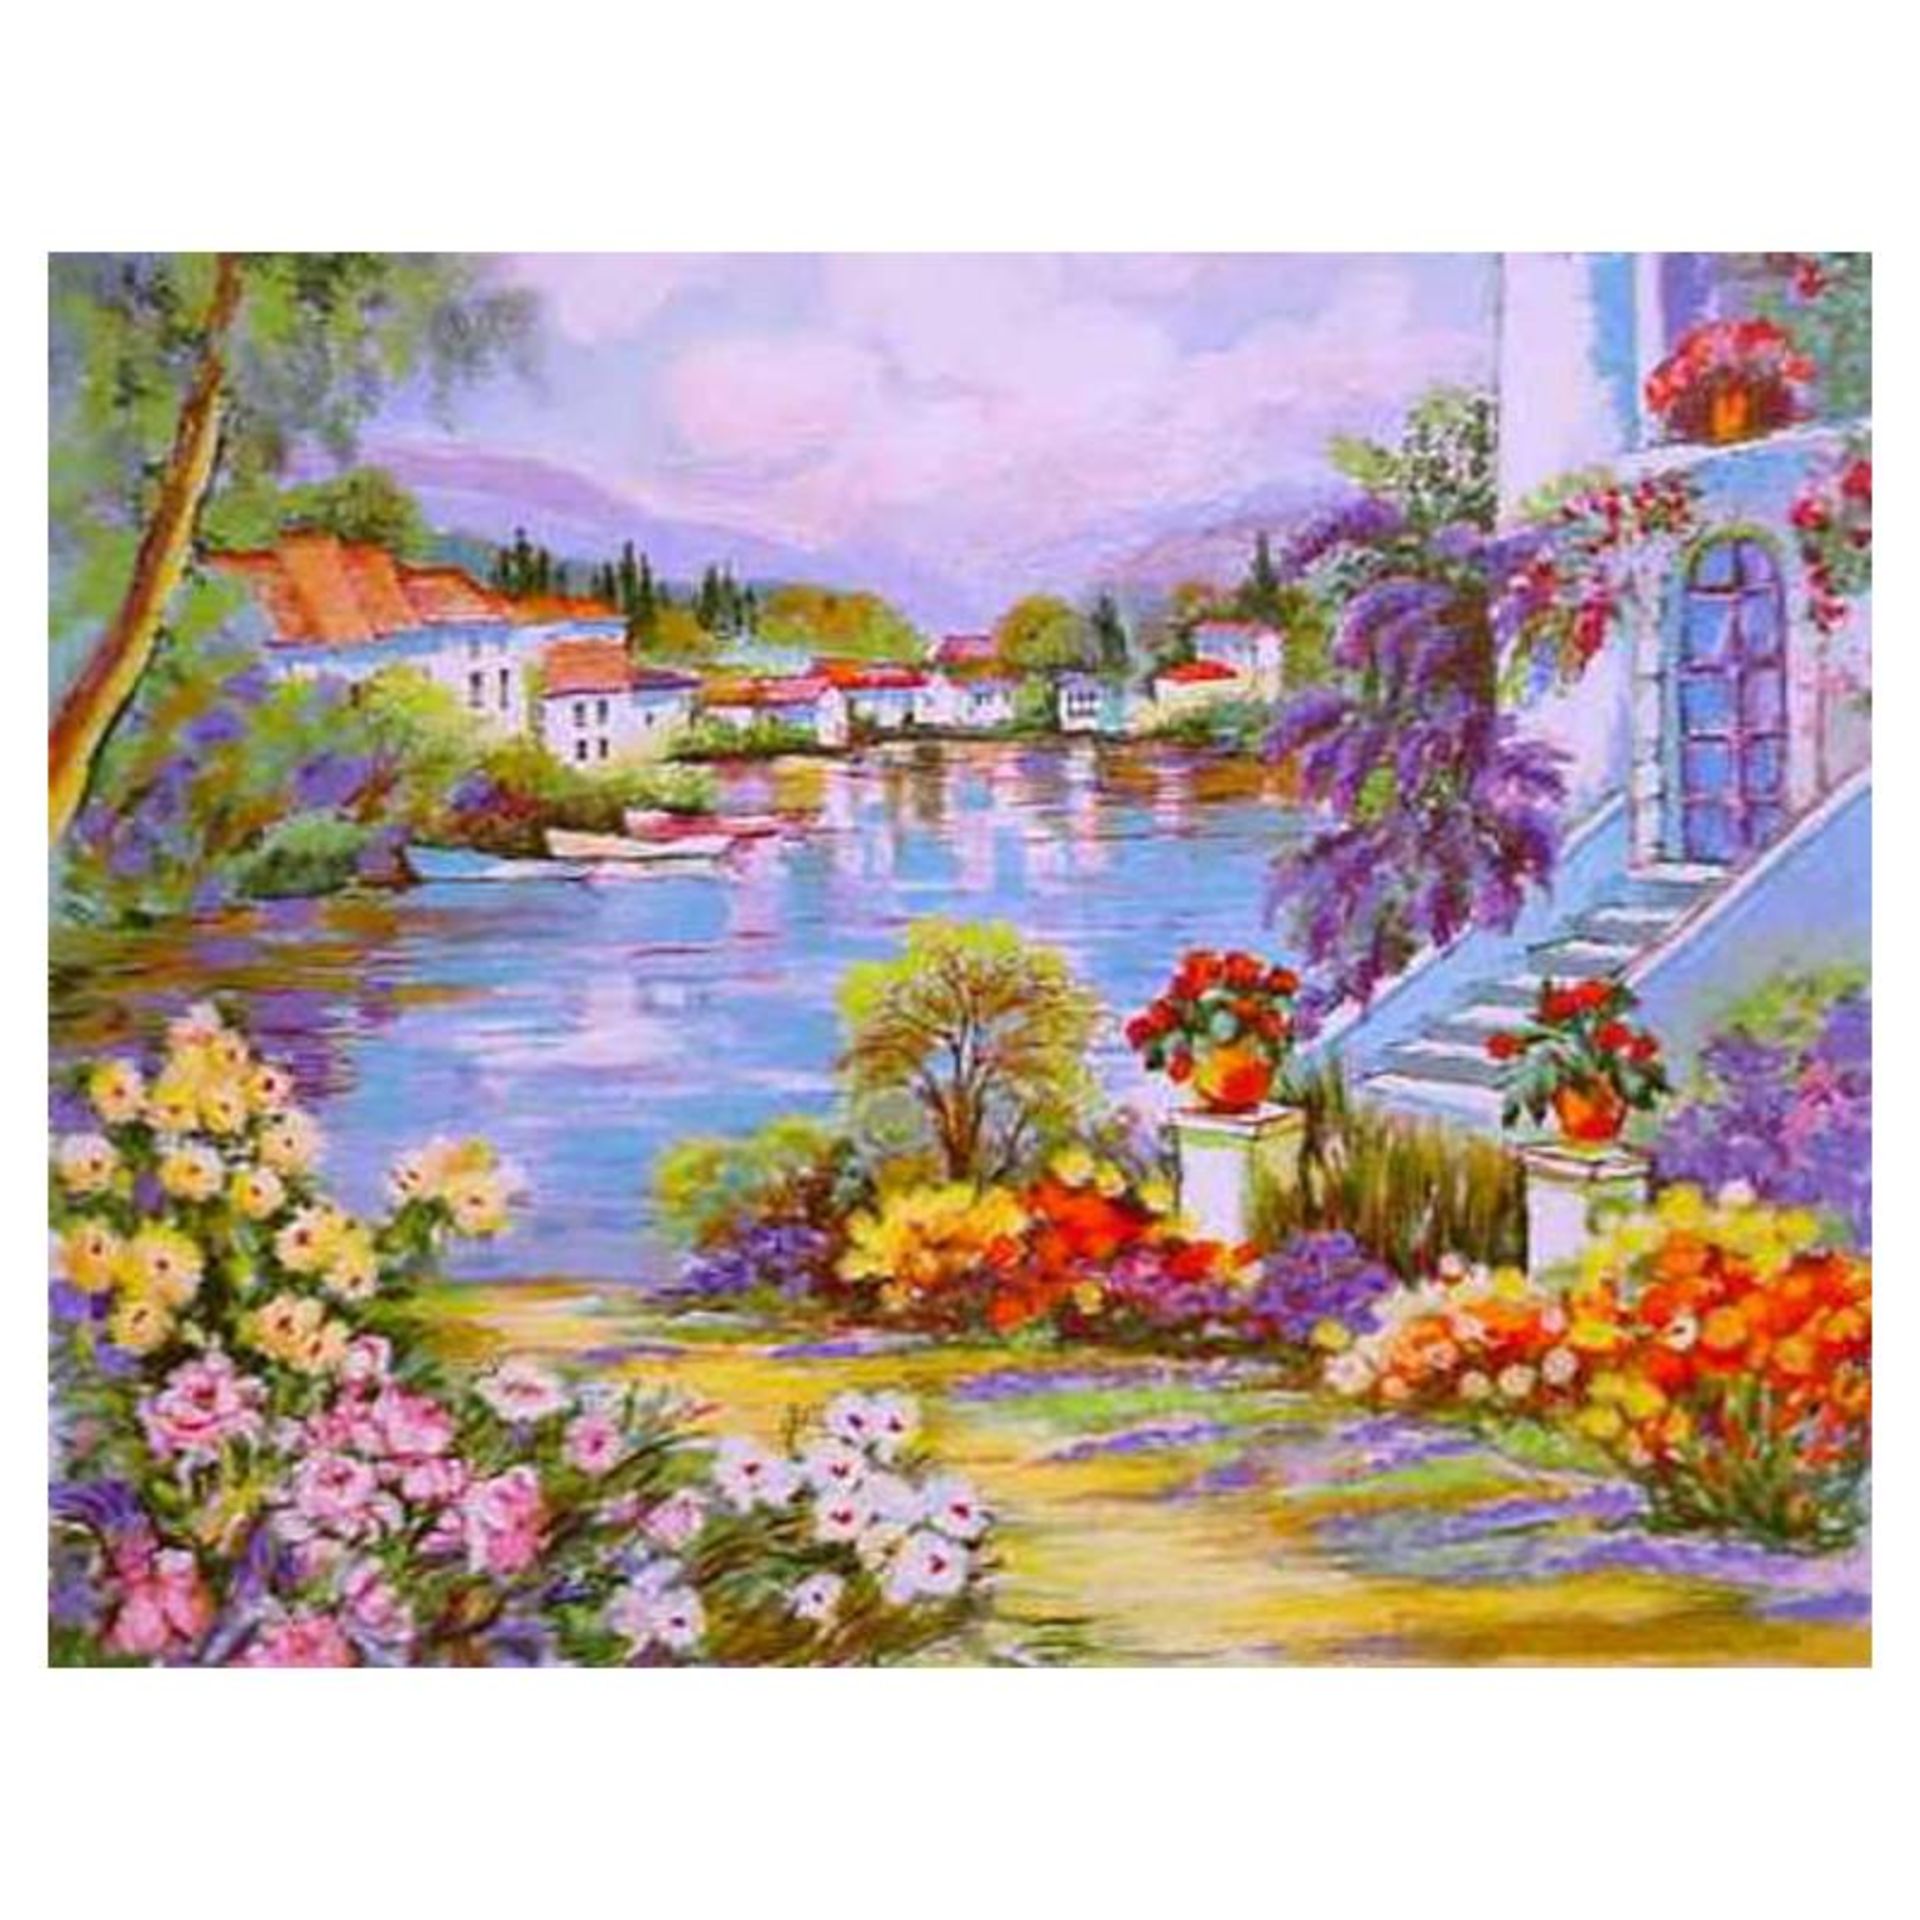 Zina Roitman, "River Side" Hand Signed Limited Edition Serigraph with Letter of